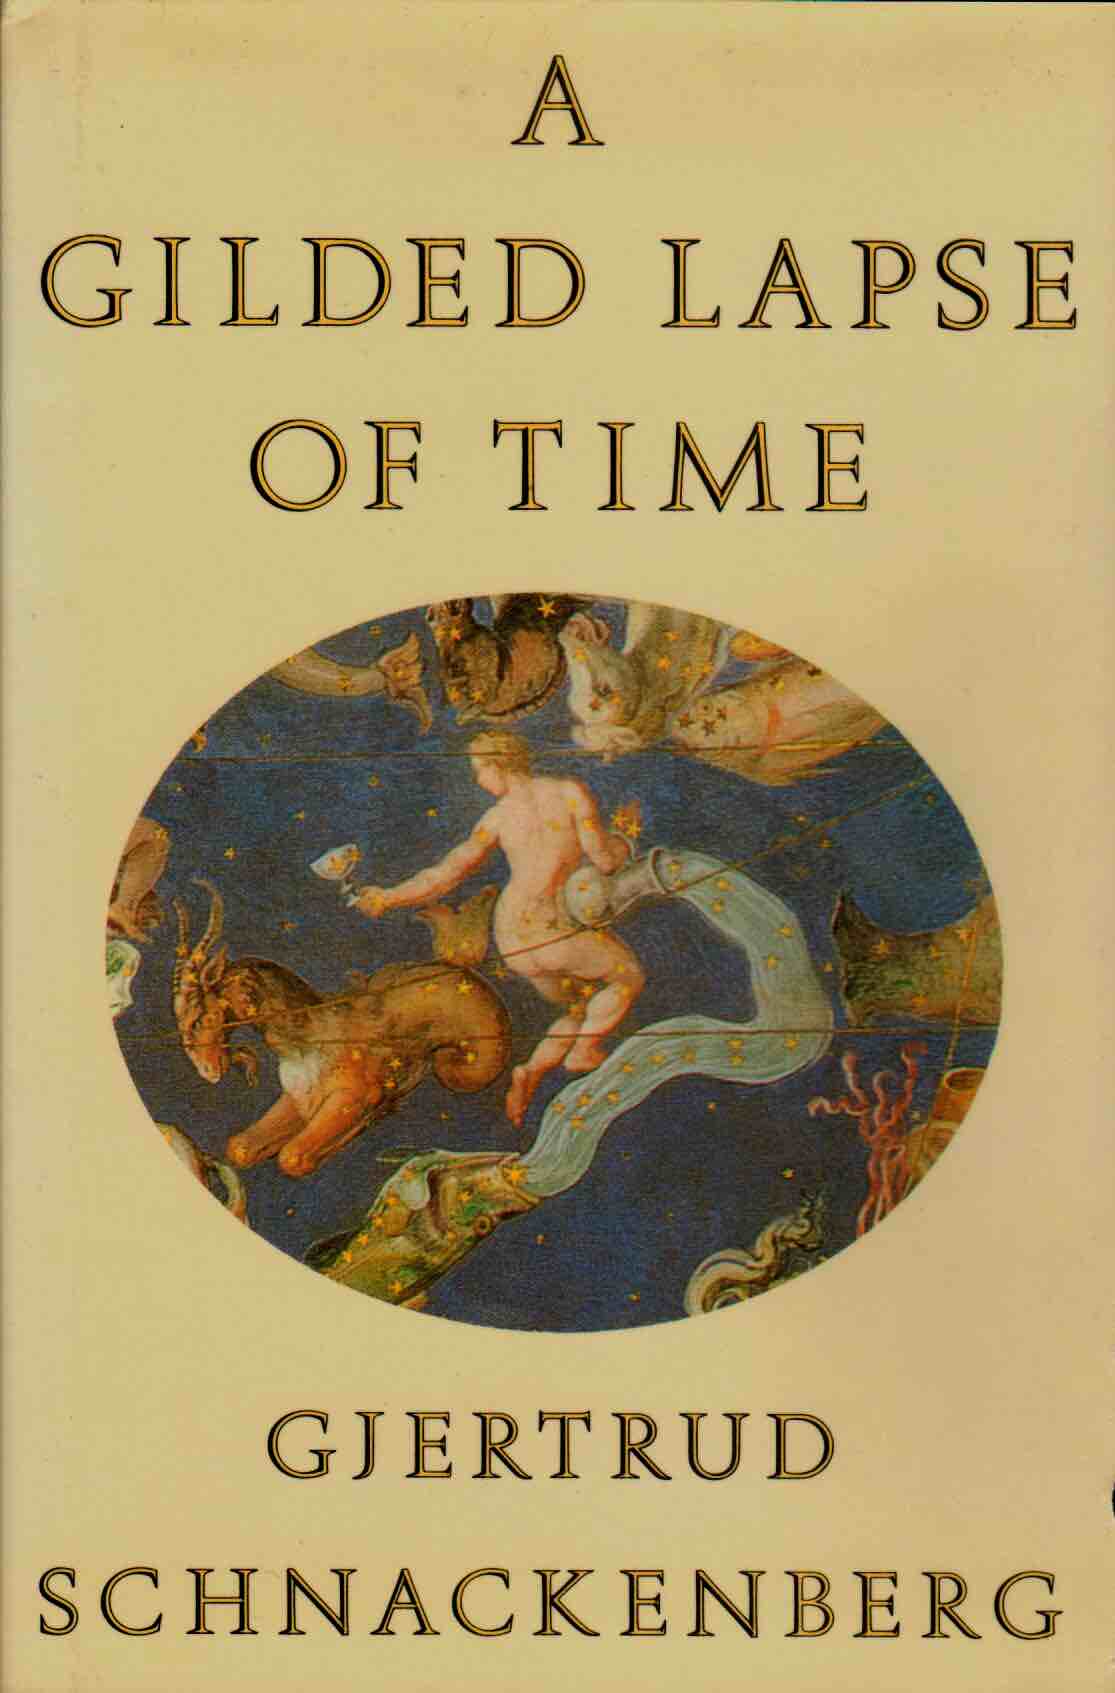 Cover of A Gilded Lapse of Time